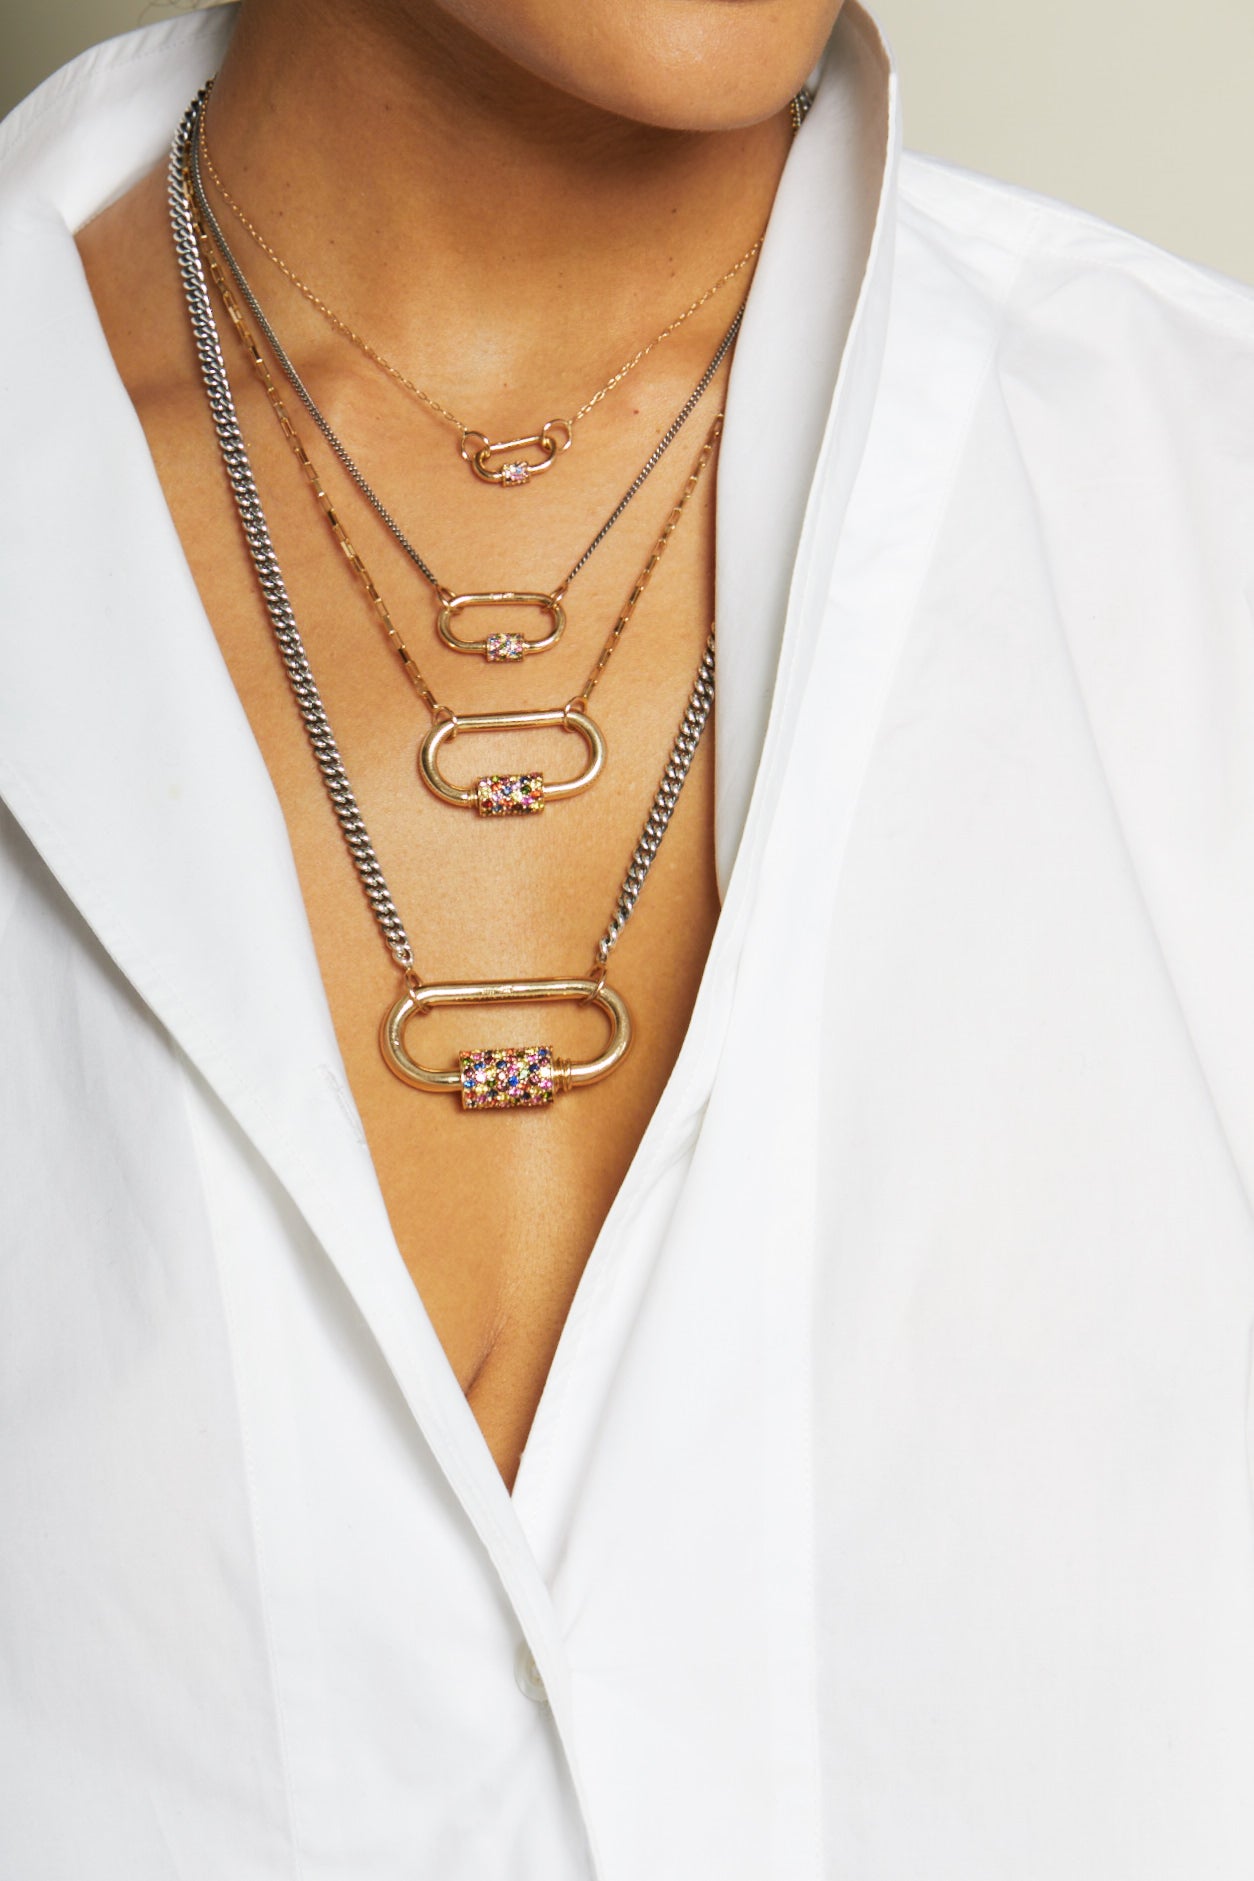 Gold Link Chain Necklace | Marla Aaron